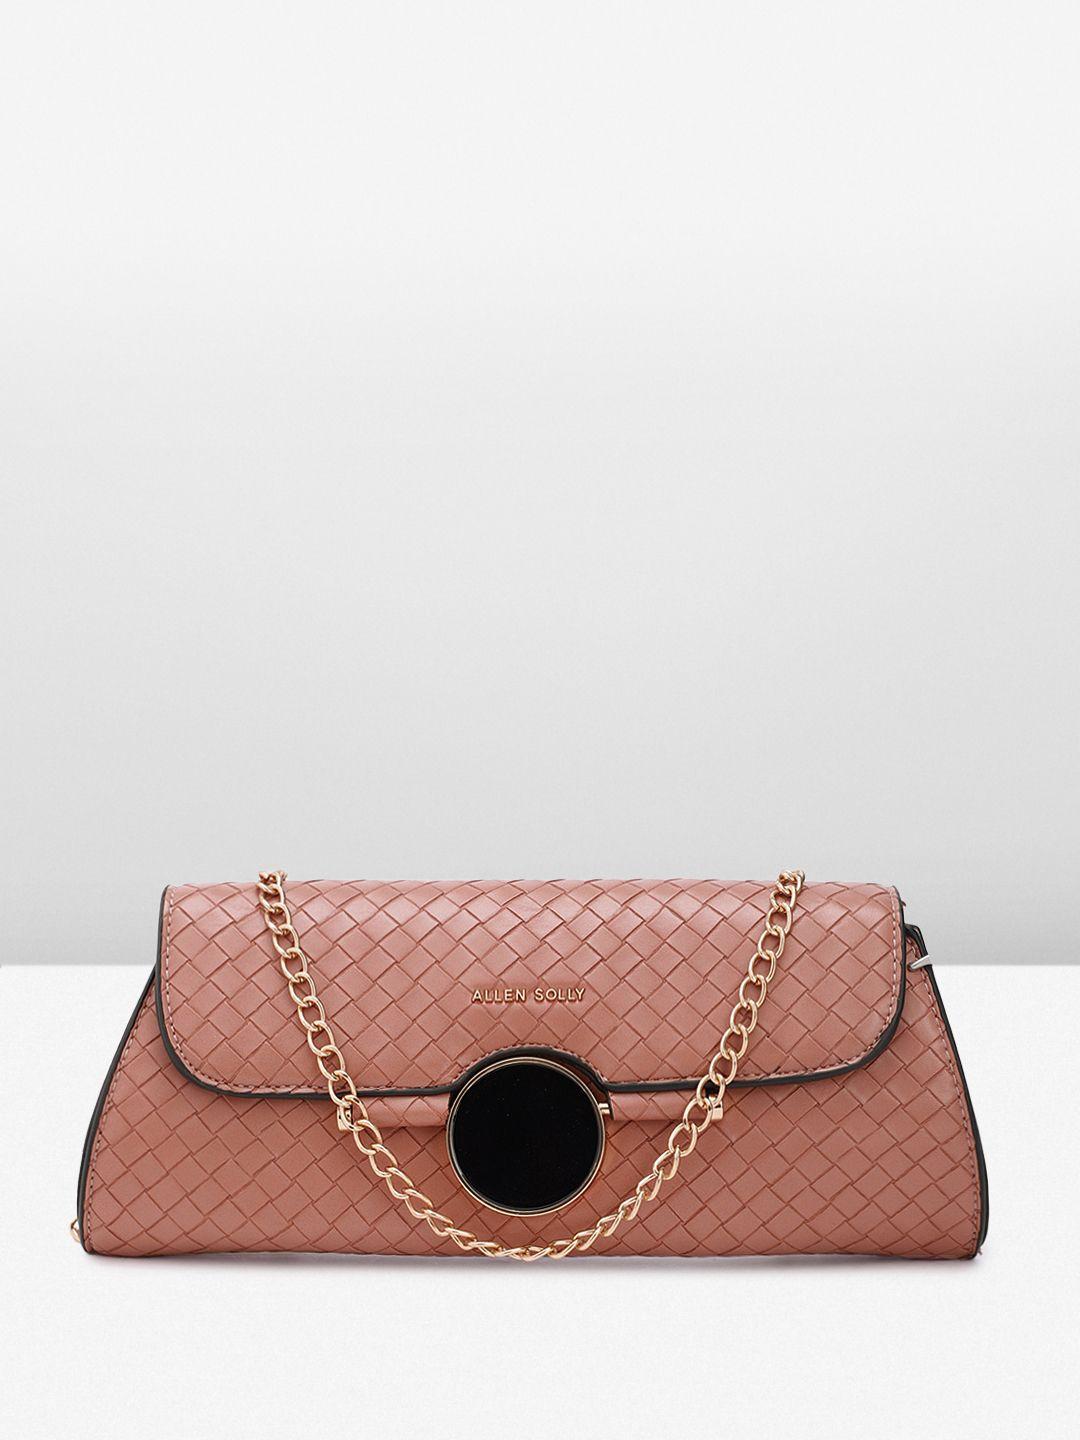 allen solly geometric textured structured sling bag